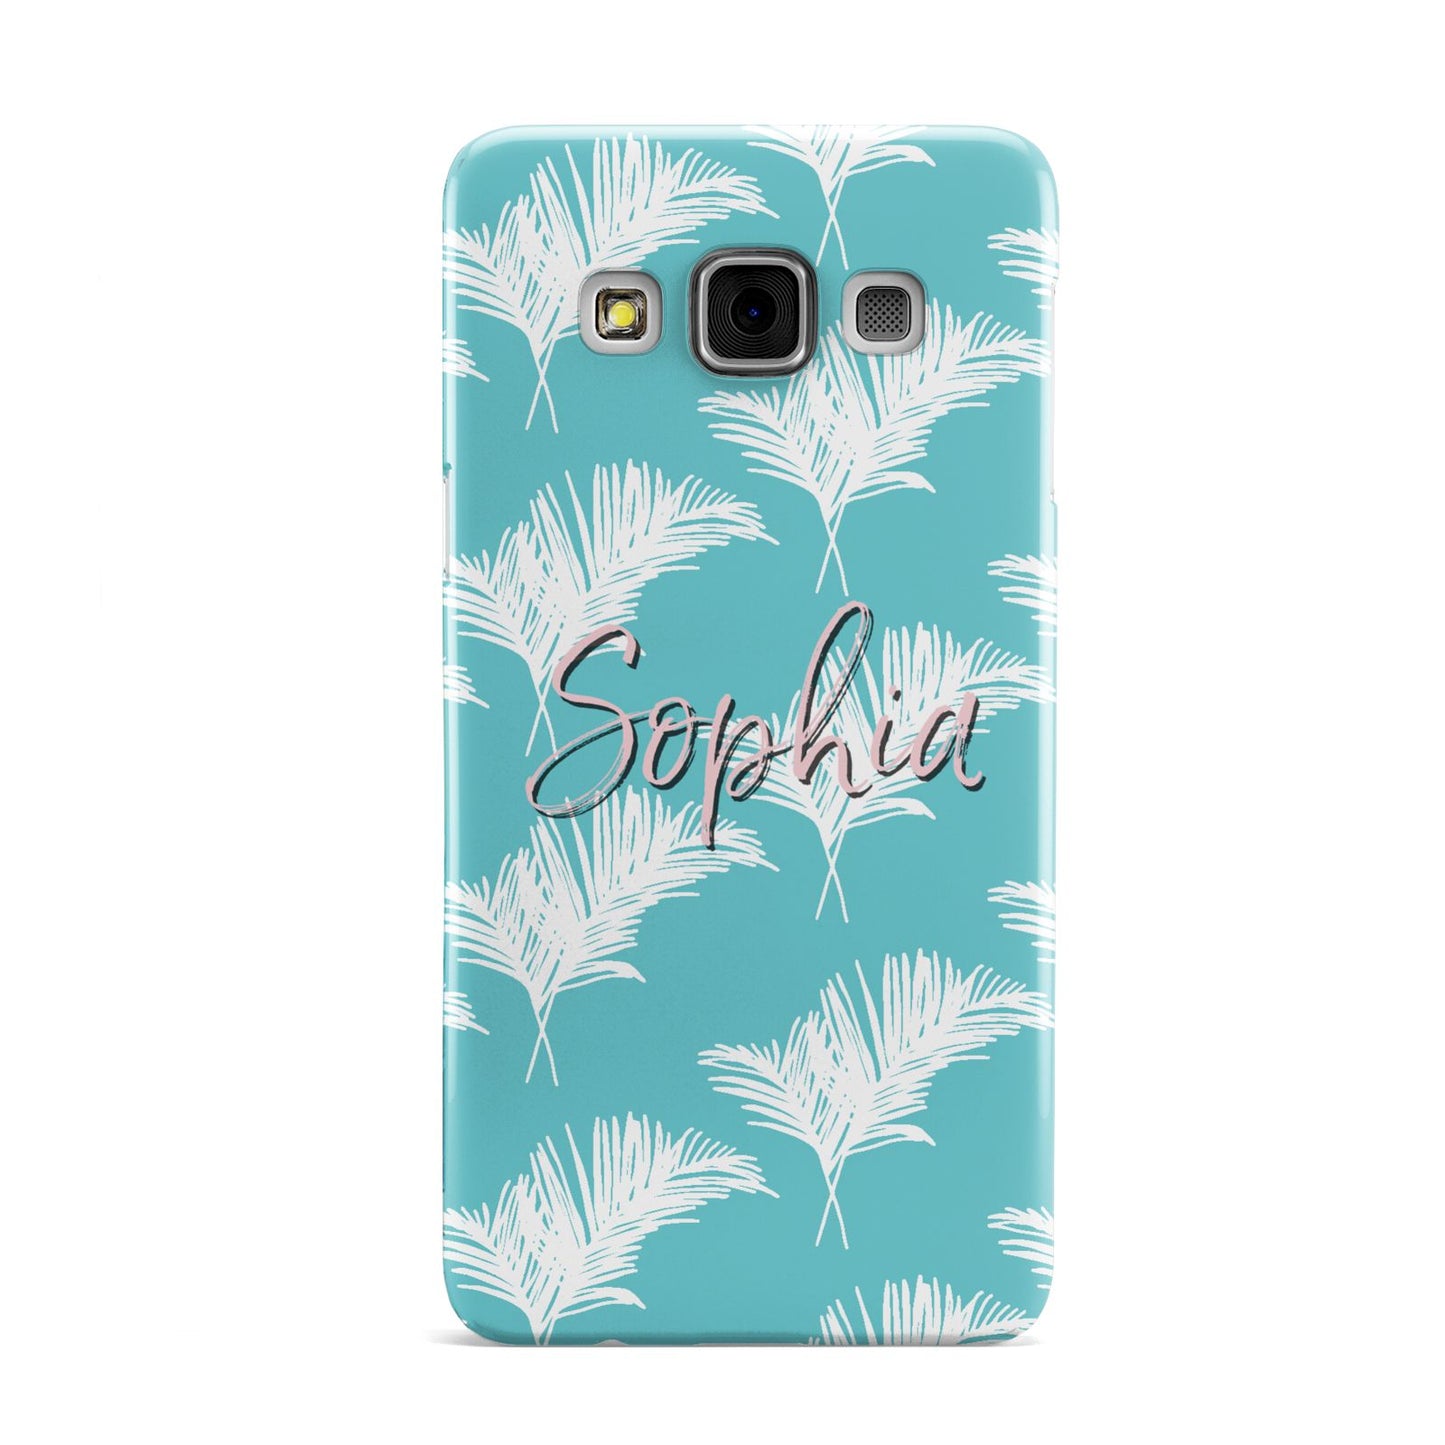 Personalised Blue White Tropical Foliage Samsung Galaxy A3 Case